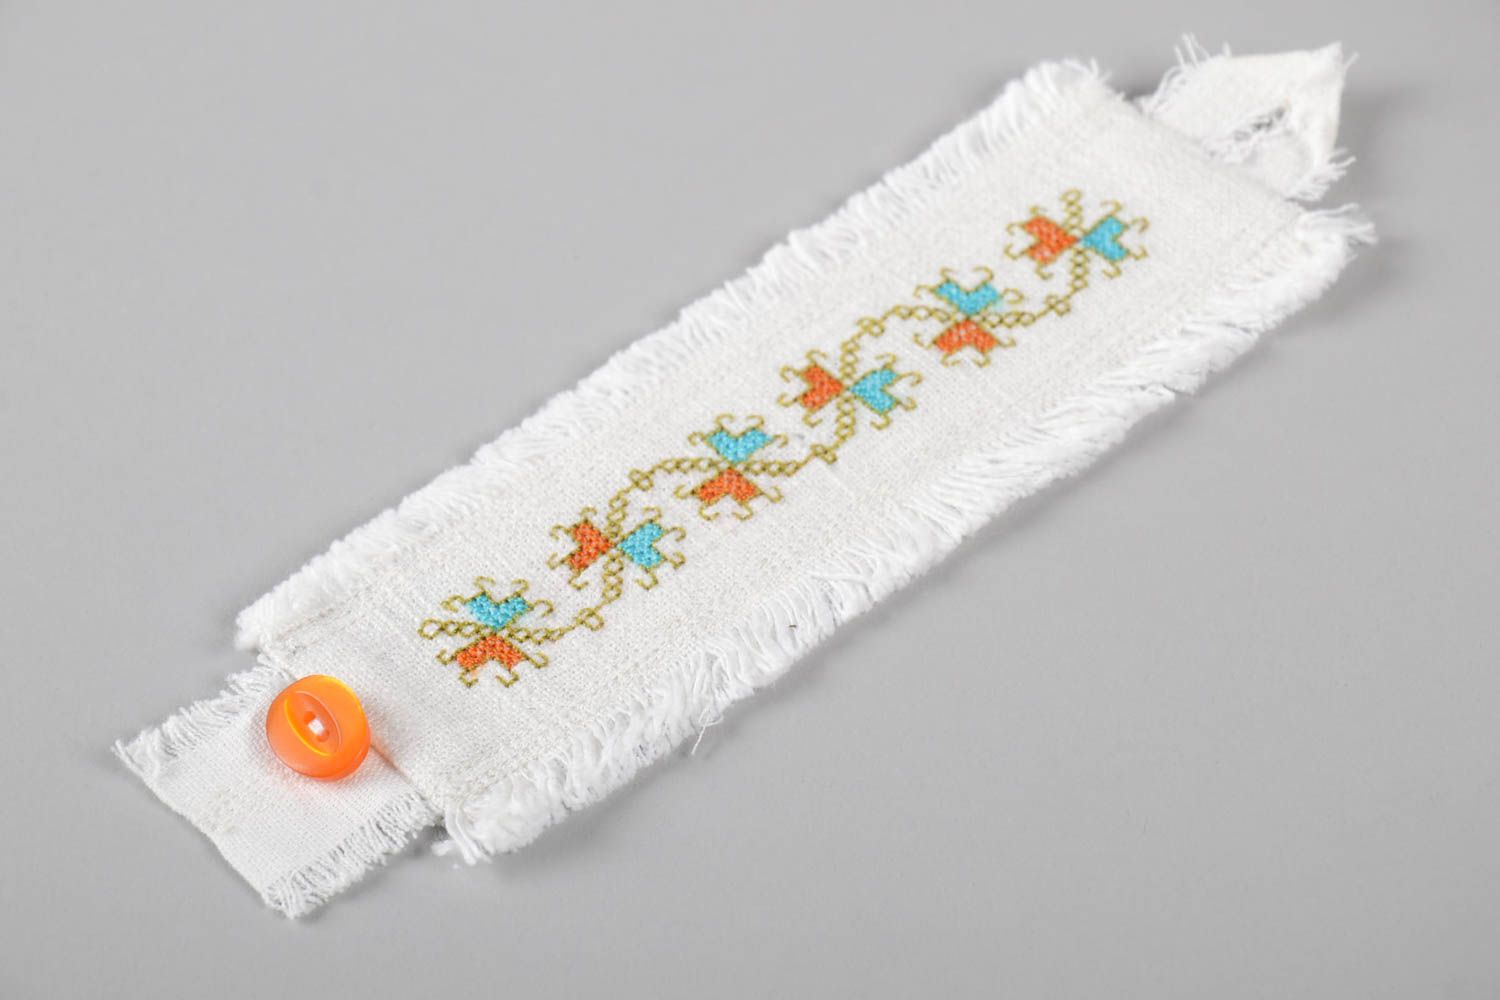 Handmade bracelet with embroidery wide bracelet in ethnic style designer jewelry photo 2